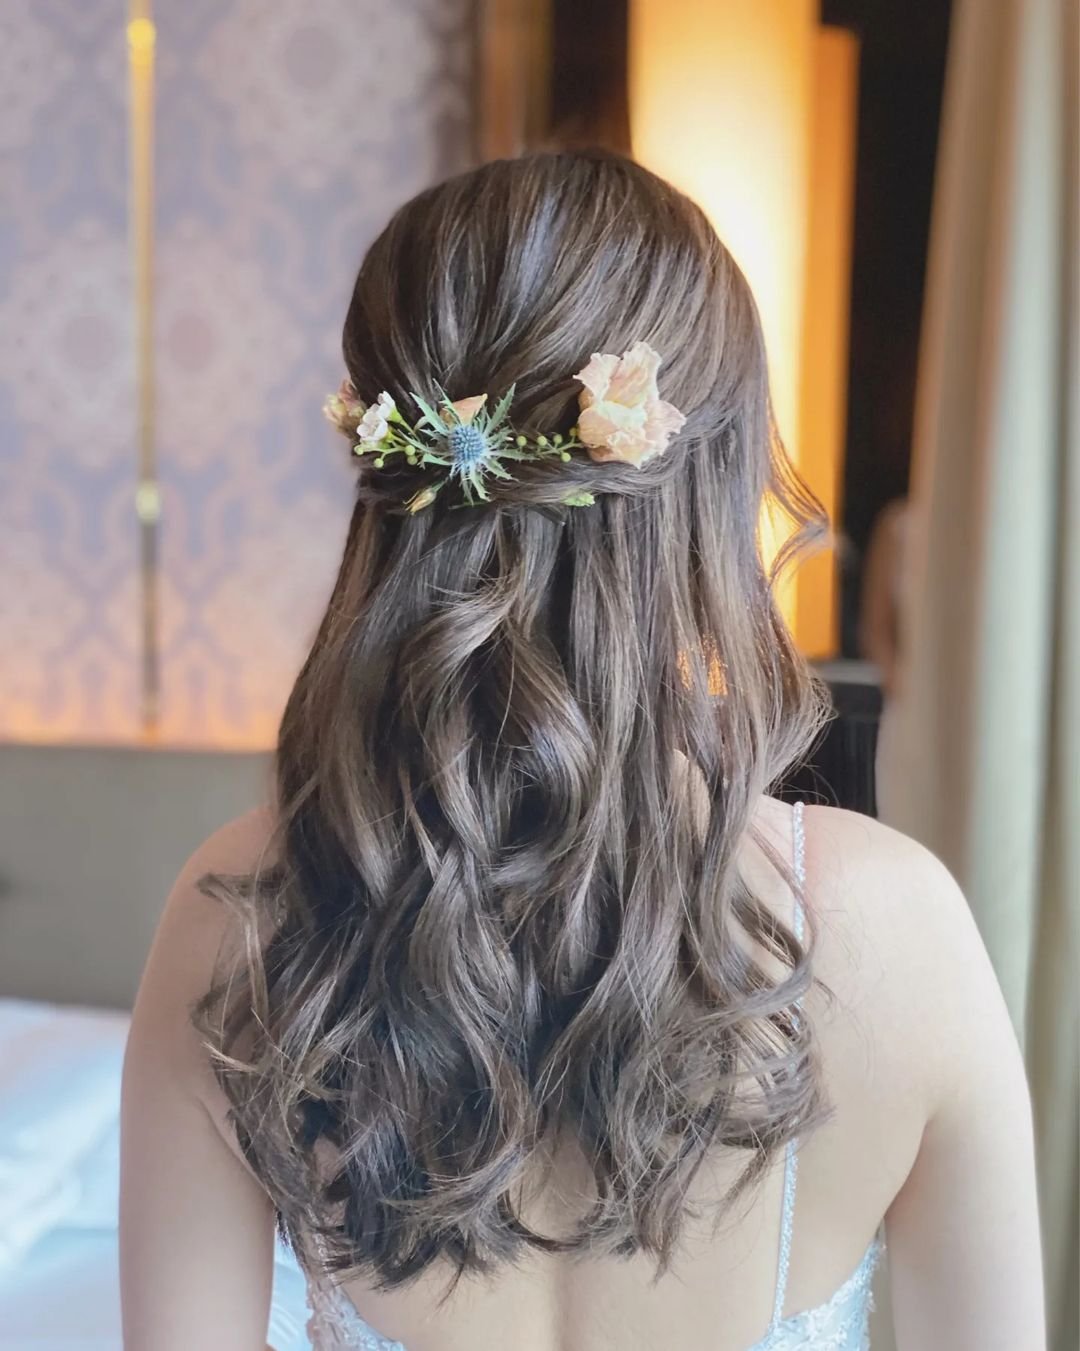 The Best Hairstyles for Every Wedding Dress Neckline